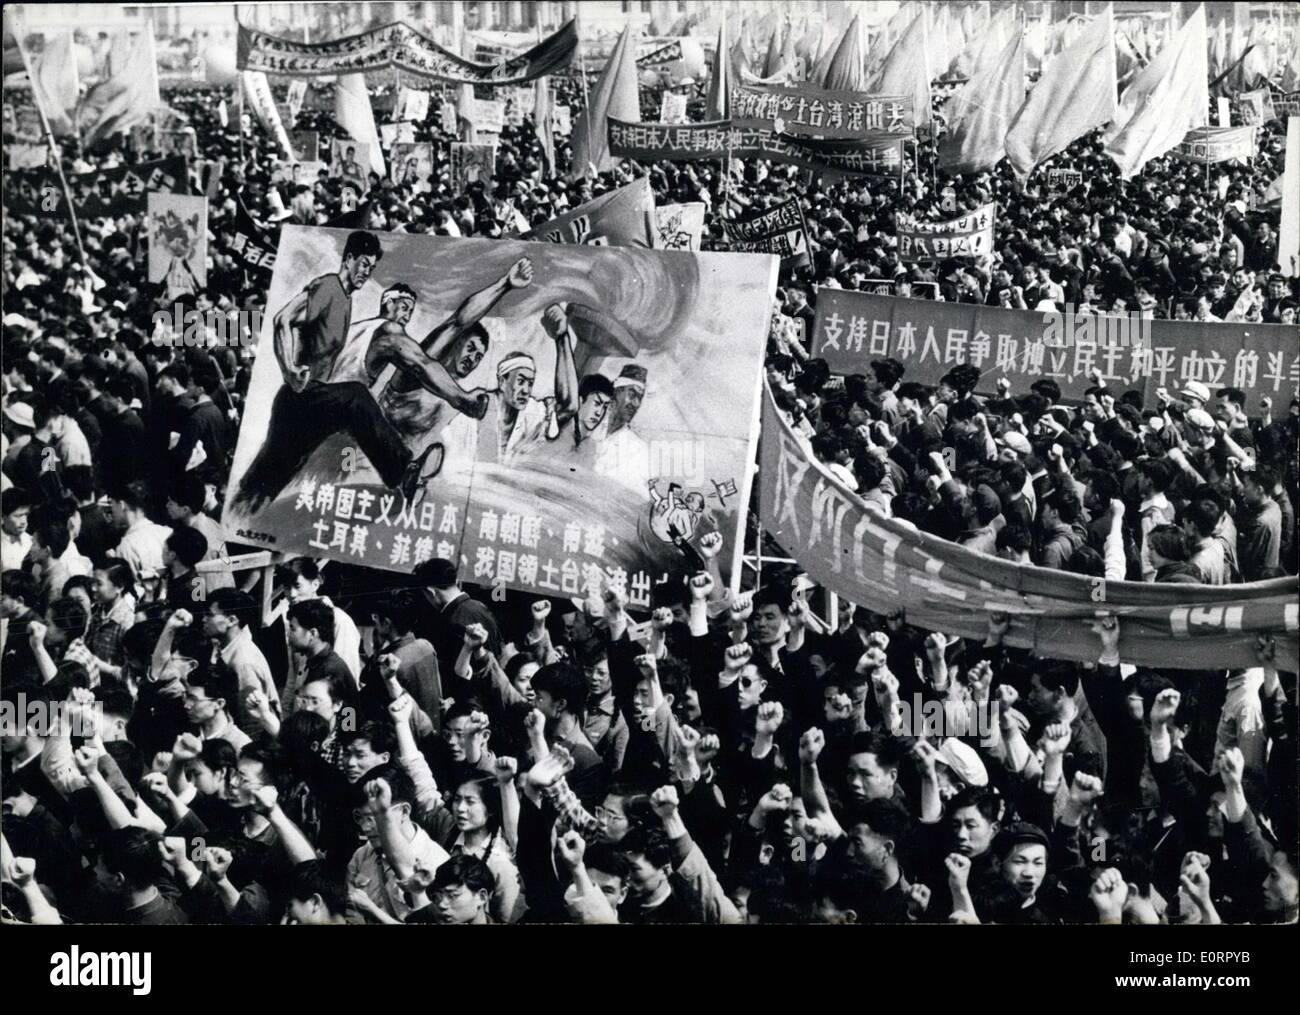 May 05, 1960 - Peking mass rally supports Japanese People's struggle against Japan-U.S. Military Pact: One million of all walks Stock Photo